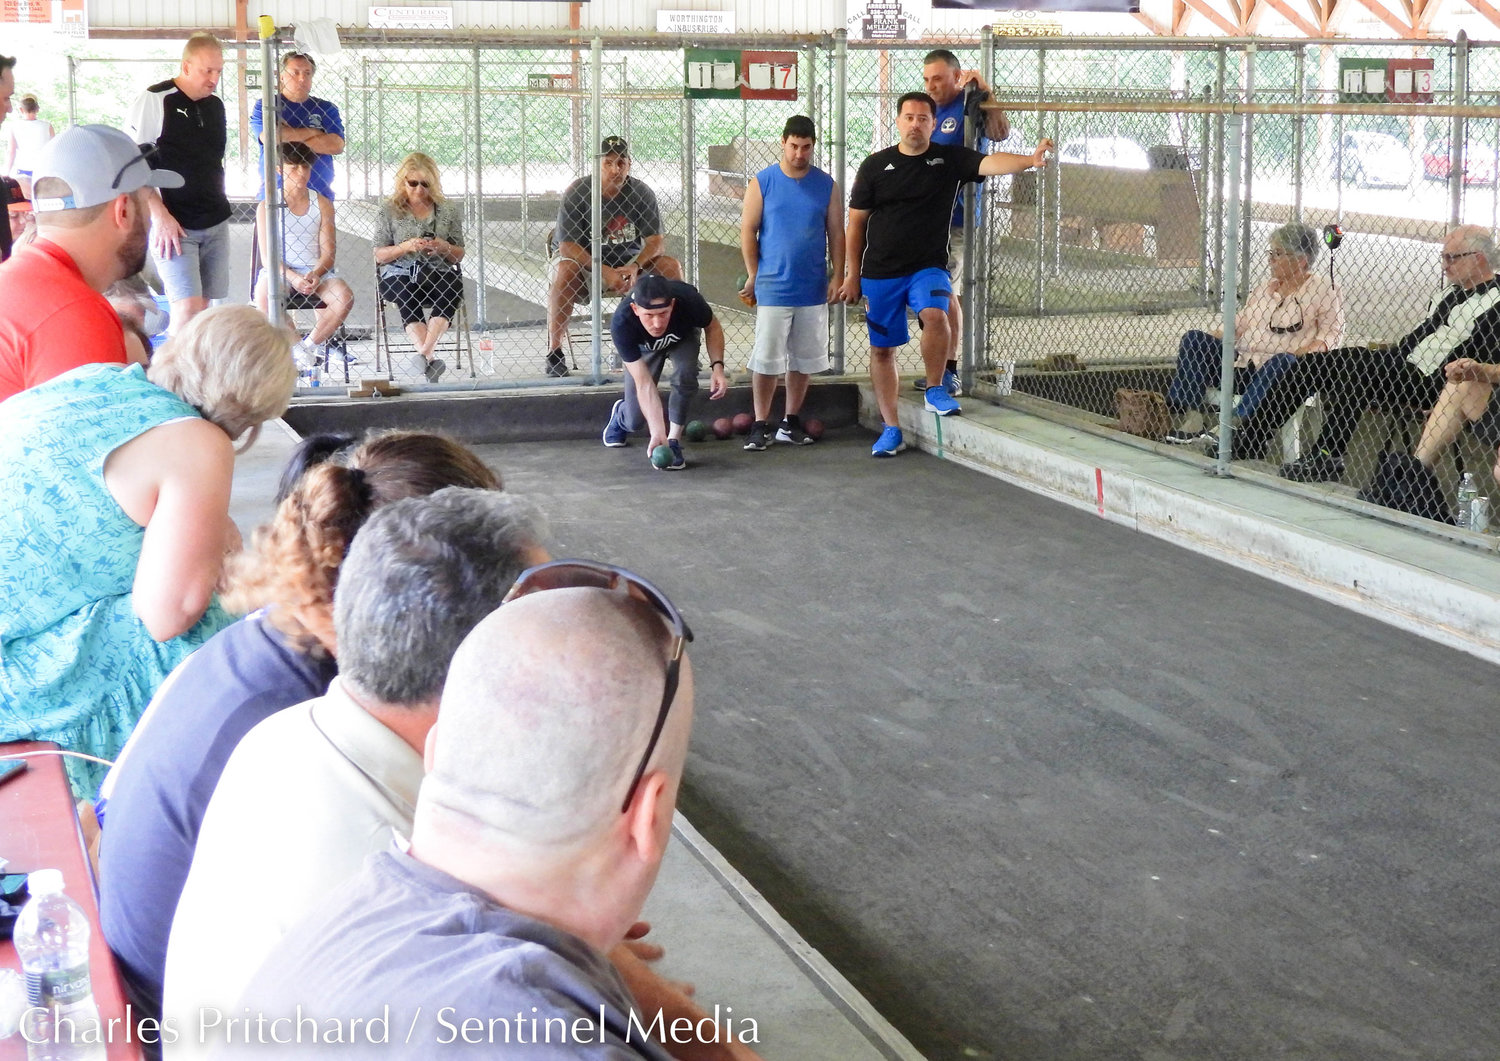 Finalists Tri-State Bocce and Club Vitu Lazio compete in the open division of the 47th World Series of Bocce Sunday at sun-drenched Toccolana Club in Rome.